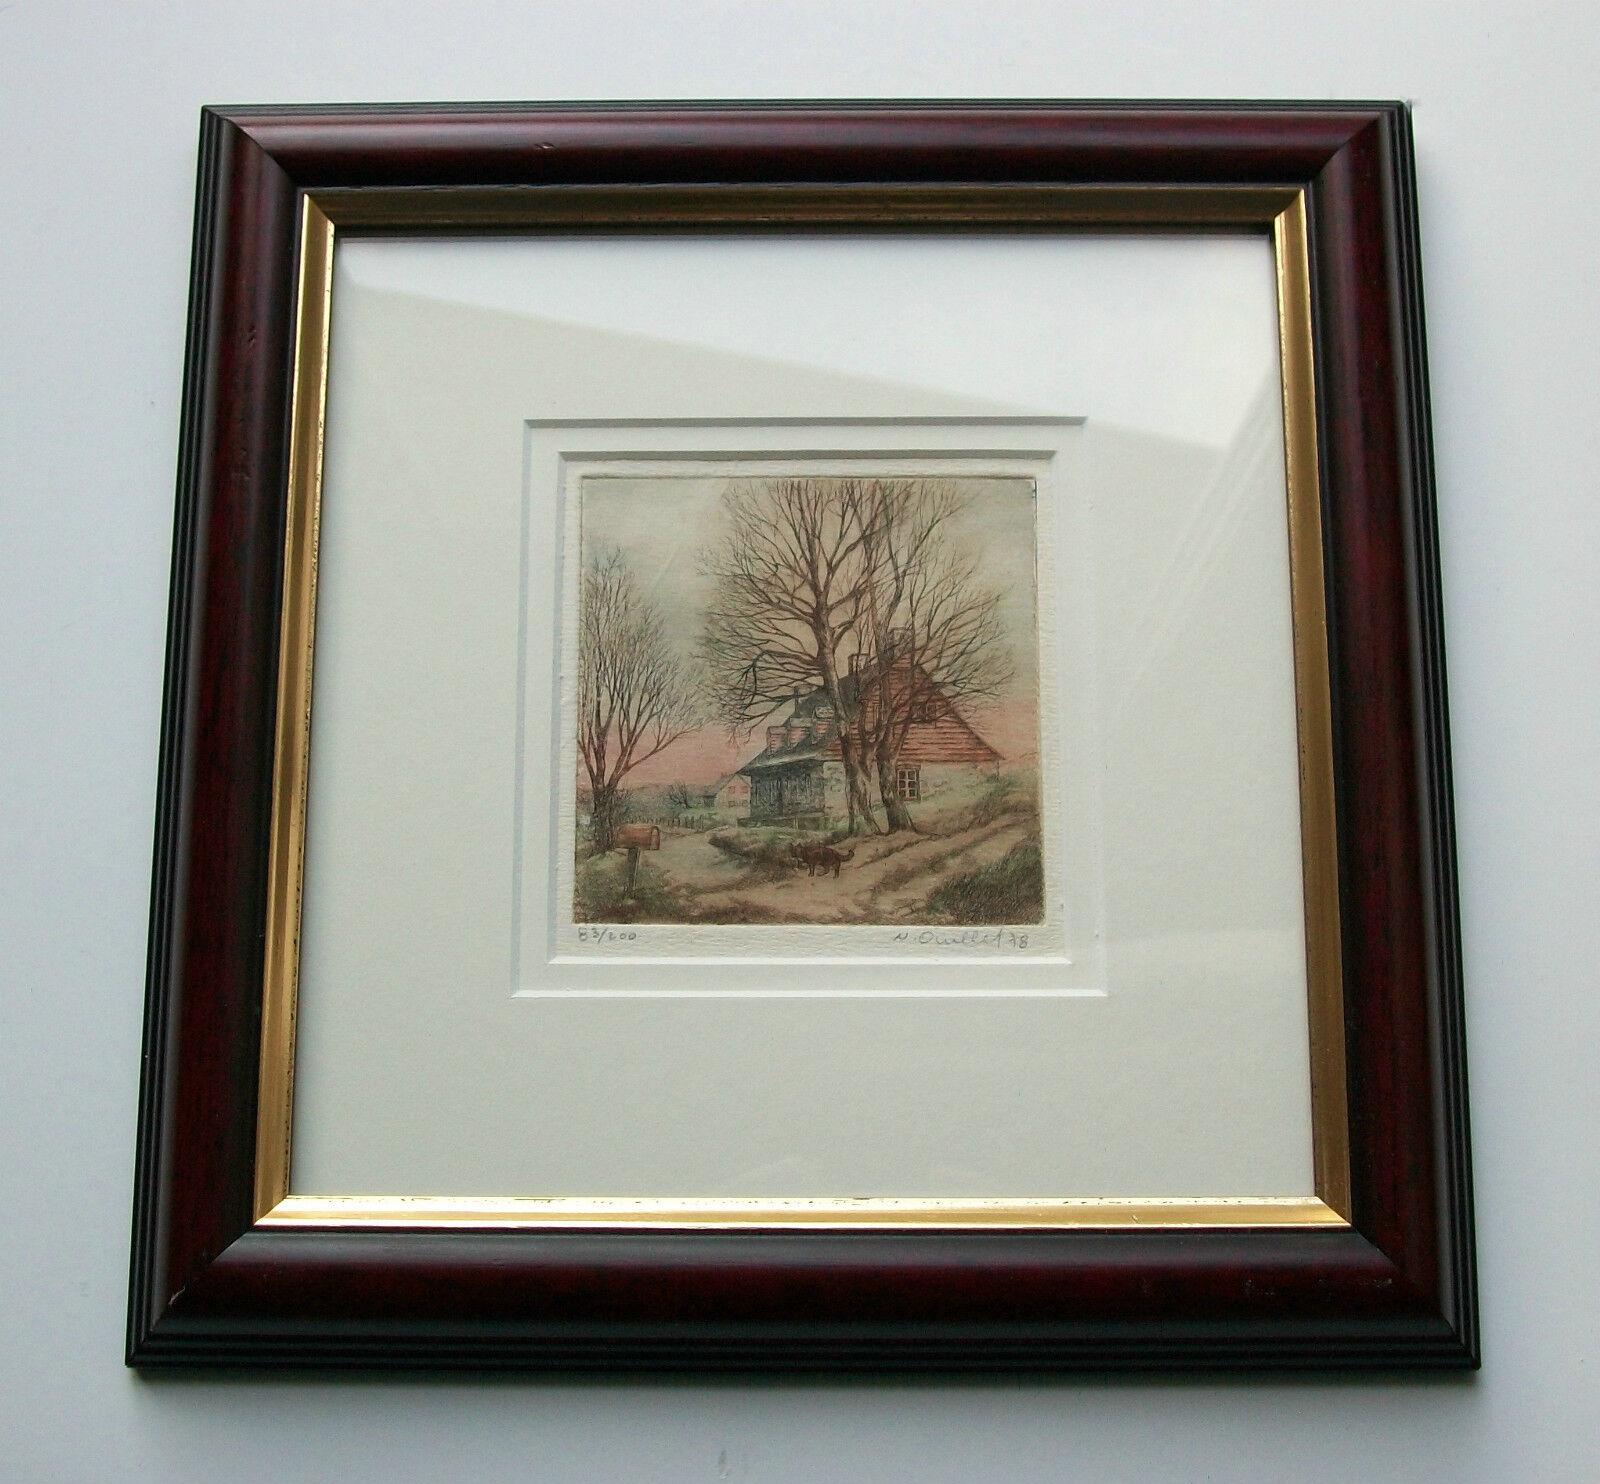 Hand-Crafted N. OUELLET - #83/200 - Vintage Framed Copperplate Engraving - Canada - C. 1978 For Sale